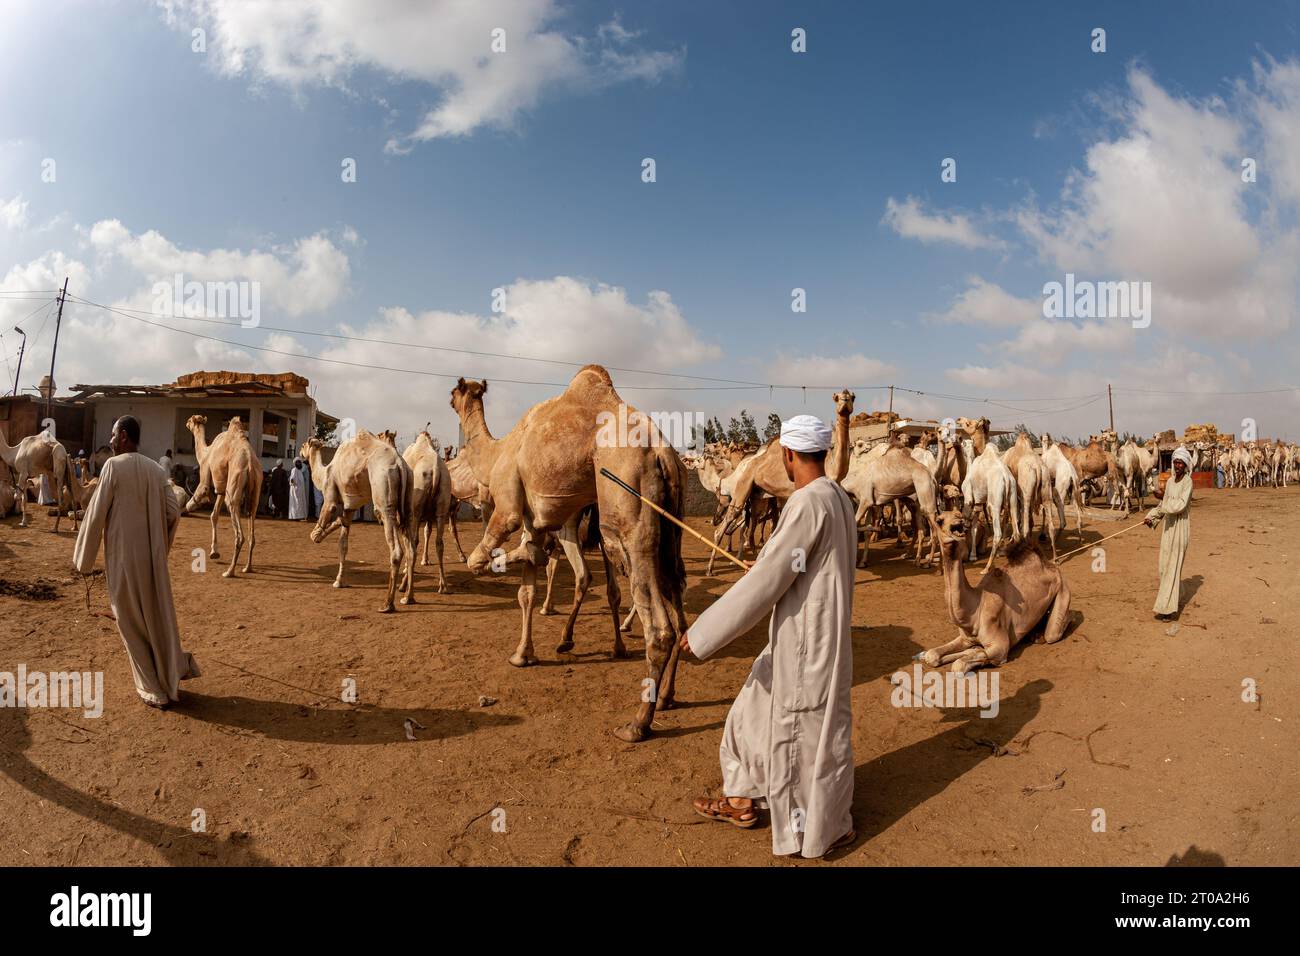 Egypt, Cairo, Birqash, Camel Market - Camels and drivers Stock Photo